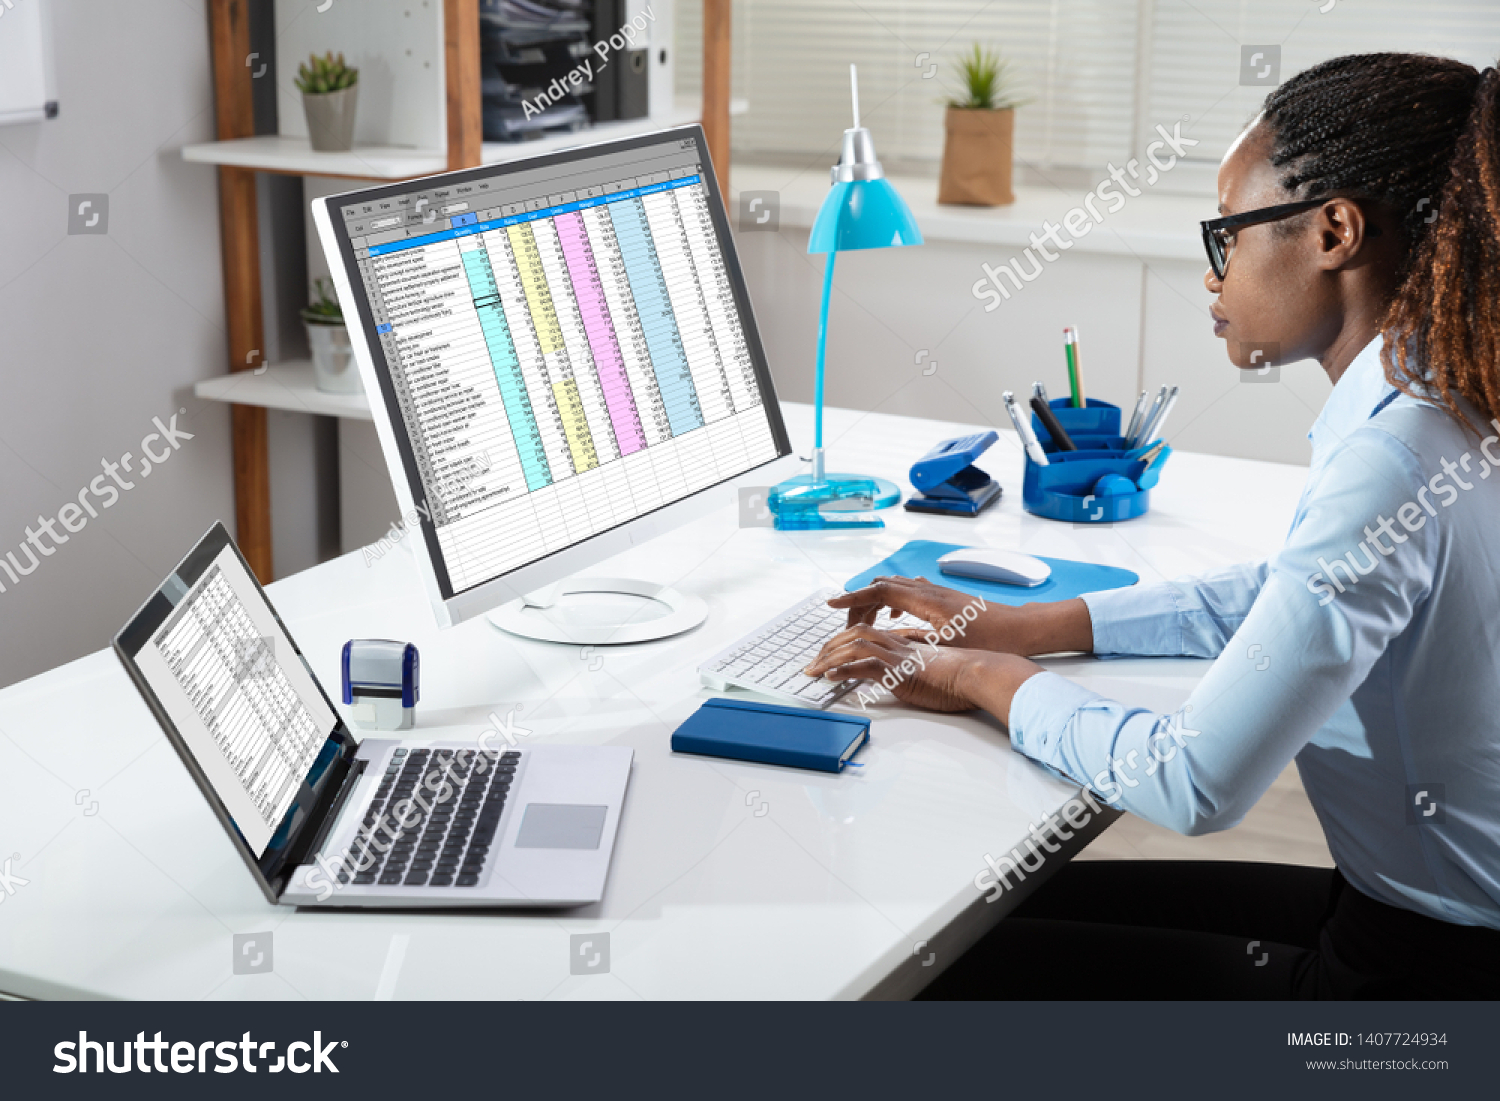 Side View Of Businesswoman's Hand Analyzing Data On Computer Over Desk #1407724934